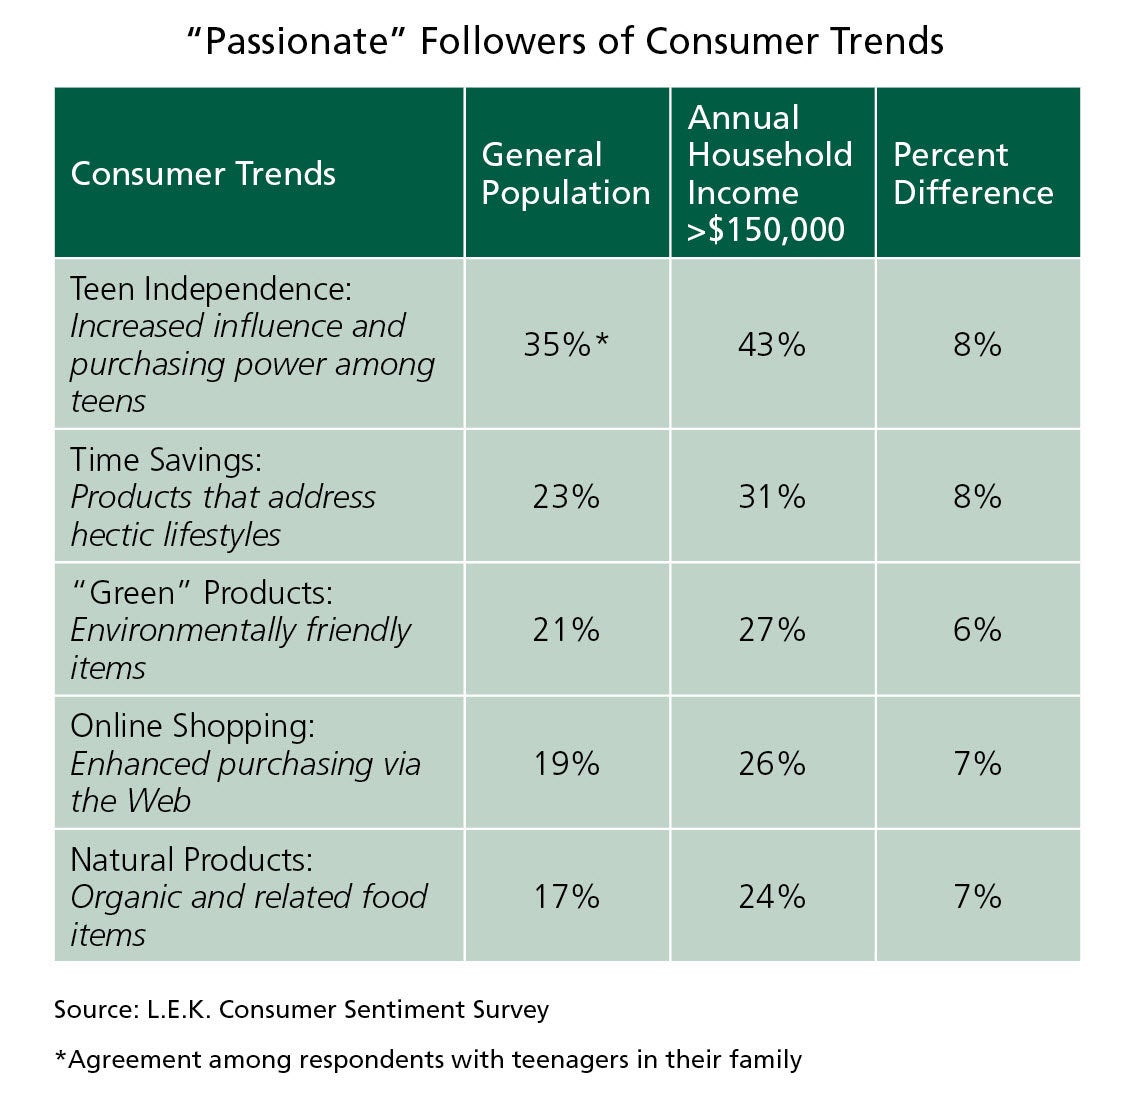 “Passionate” Followers of Consumer Trends